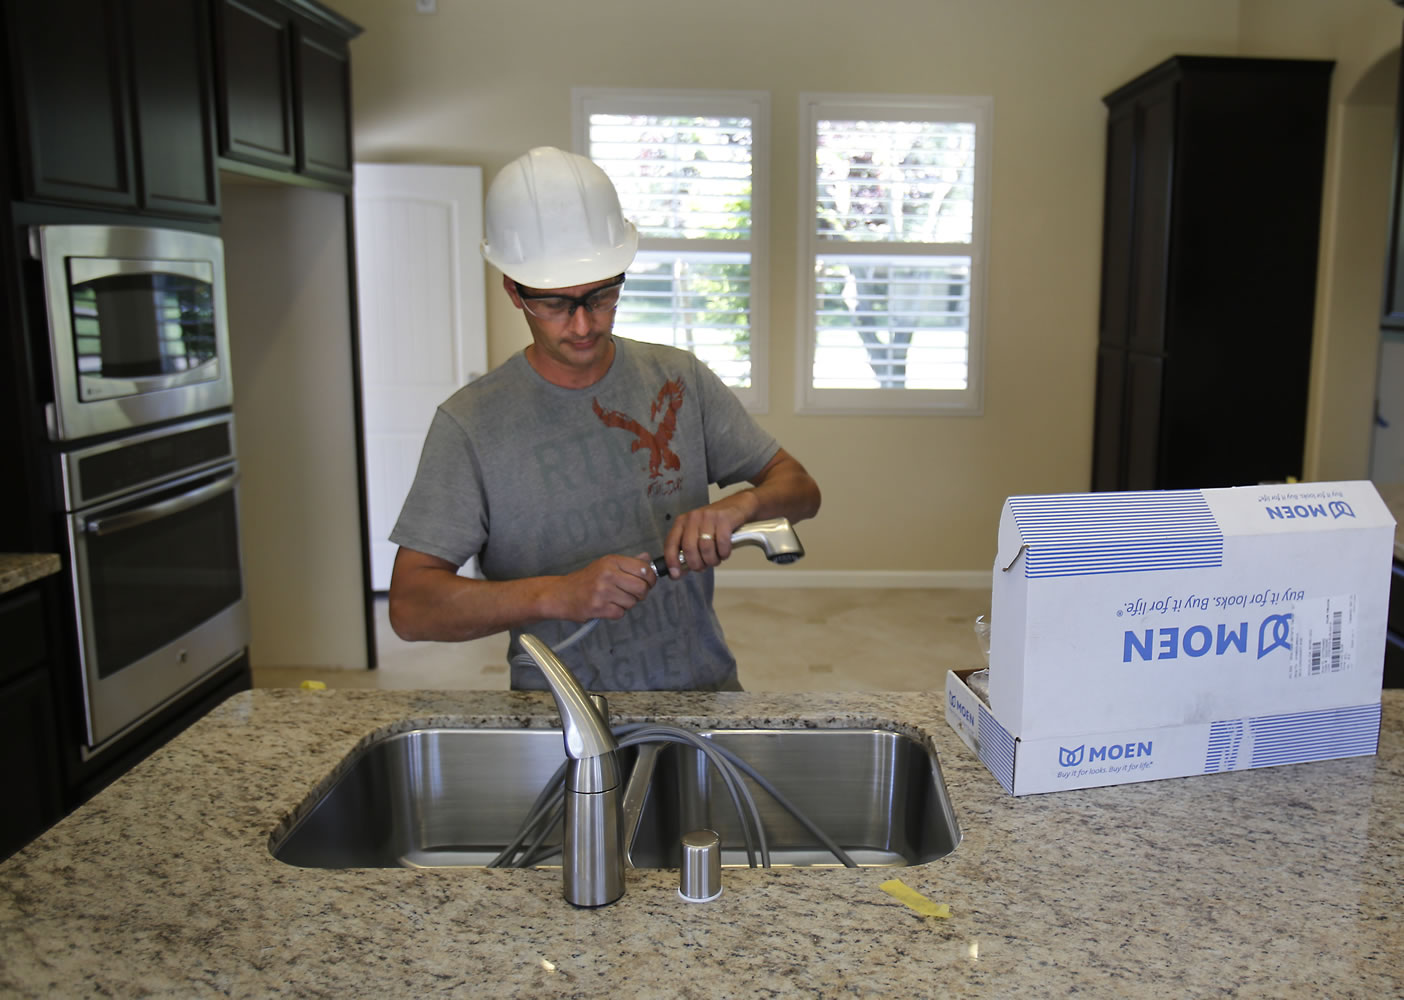 Plumber Daniel Bordwell installs a kitchen faucet on a home under construction in Sacramento, Calif. on June 21. Another solid month of hiring in June could signal the start of a stronger second half of the year for the U.S. economy. The Fed's low interest-rate policies have encouraged more Americans to buy homes and cars.